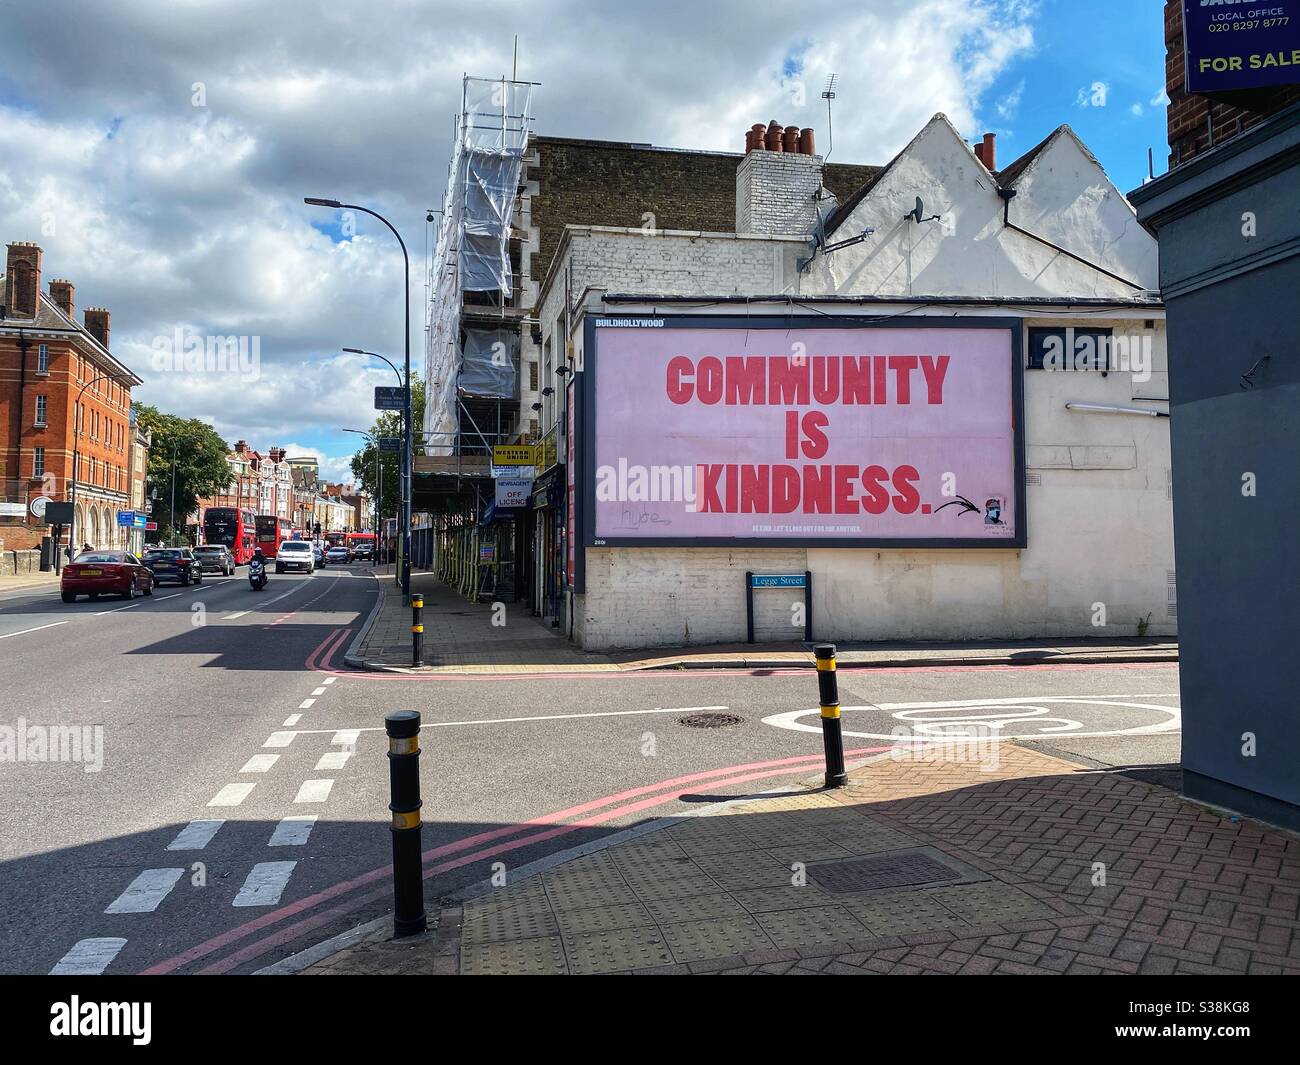 The community is kindness campaign is seen on a billboard in Lewisham London during the COVD-19 pandemic. The campaign is run by agencies Jack, Jack arts And Diabolical. Taken on August 1 2020. Stock Photo